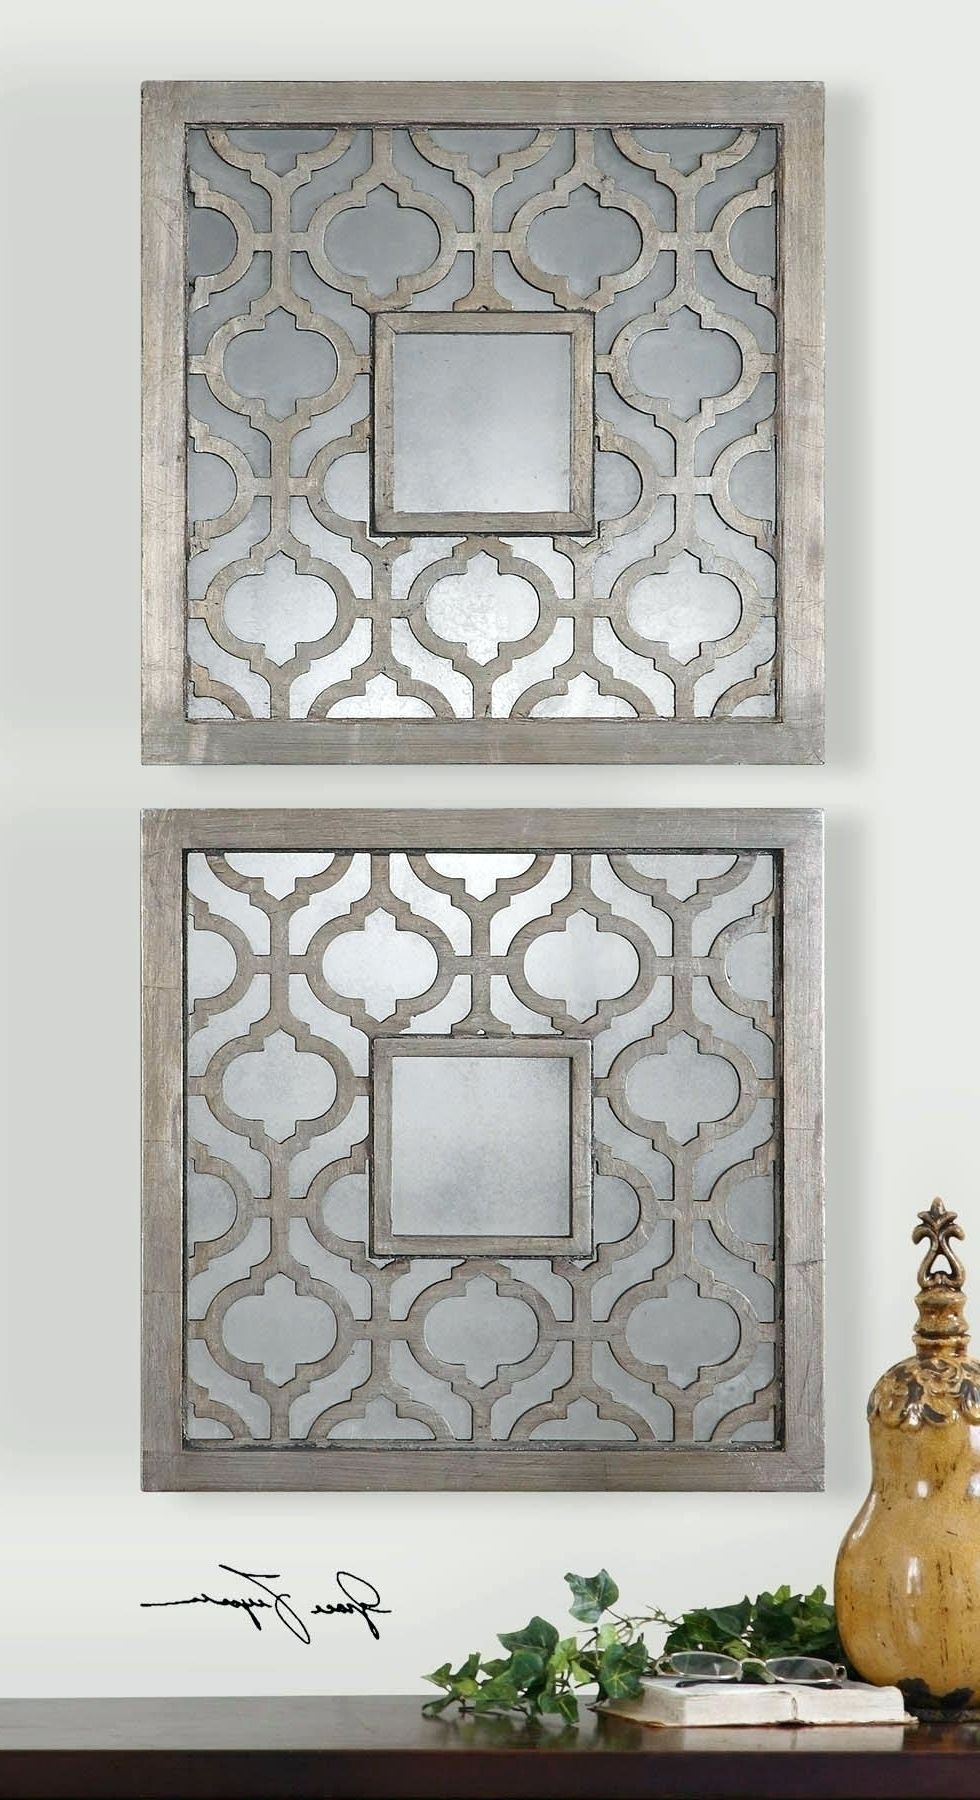 Metal Framed Wall Art Throughout Famous Wall Arts Mirror Frame Art Framed Uk On Metal Wall Art Decorthe (View 6 of 15)